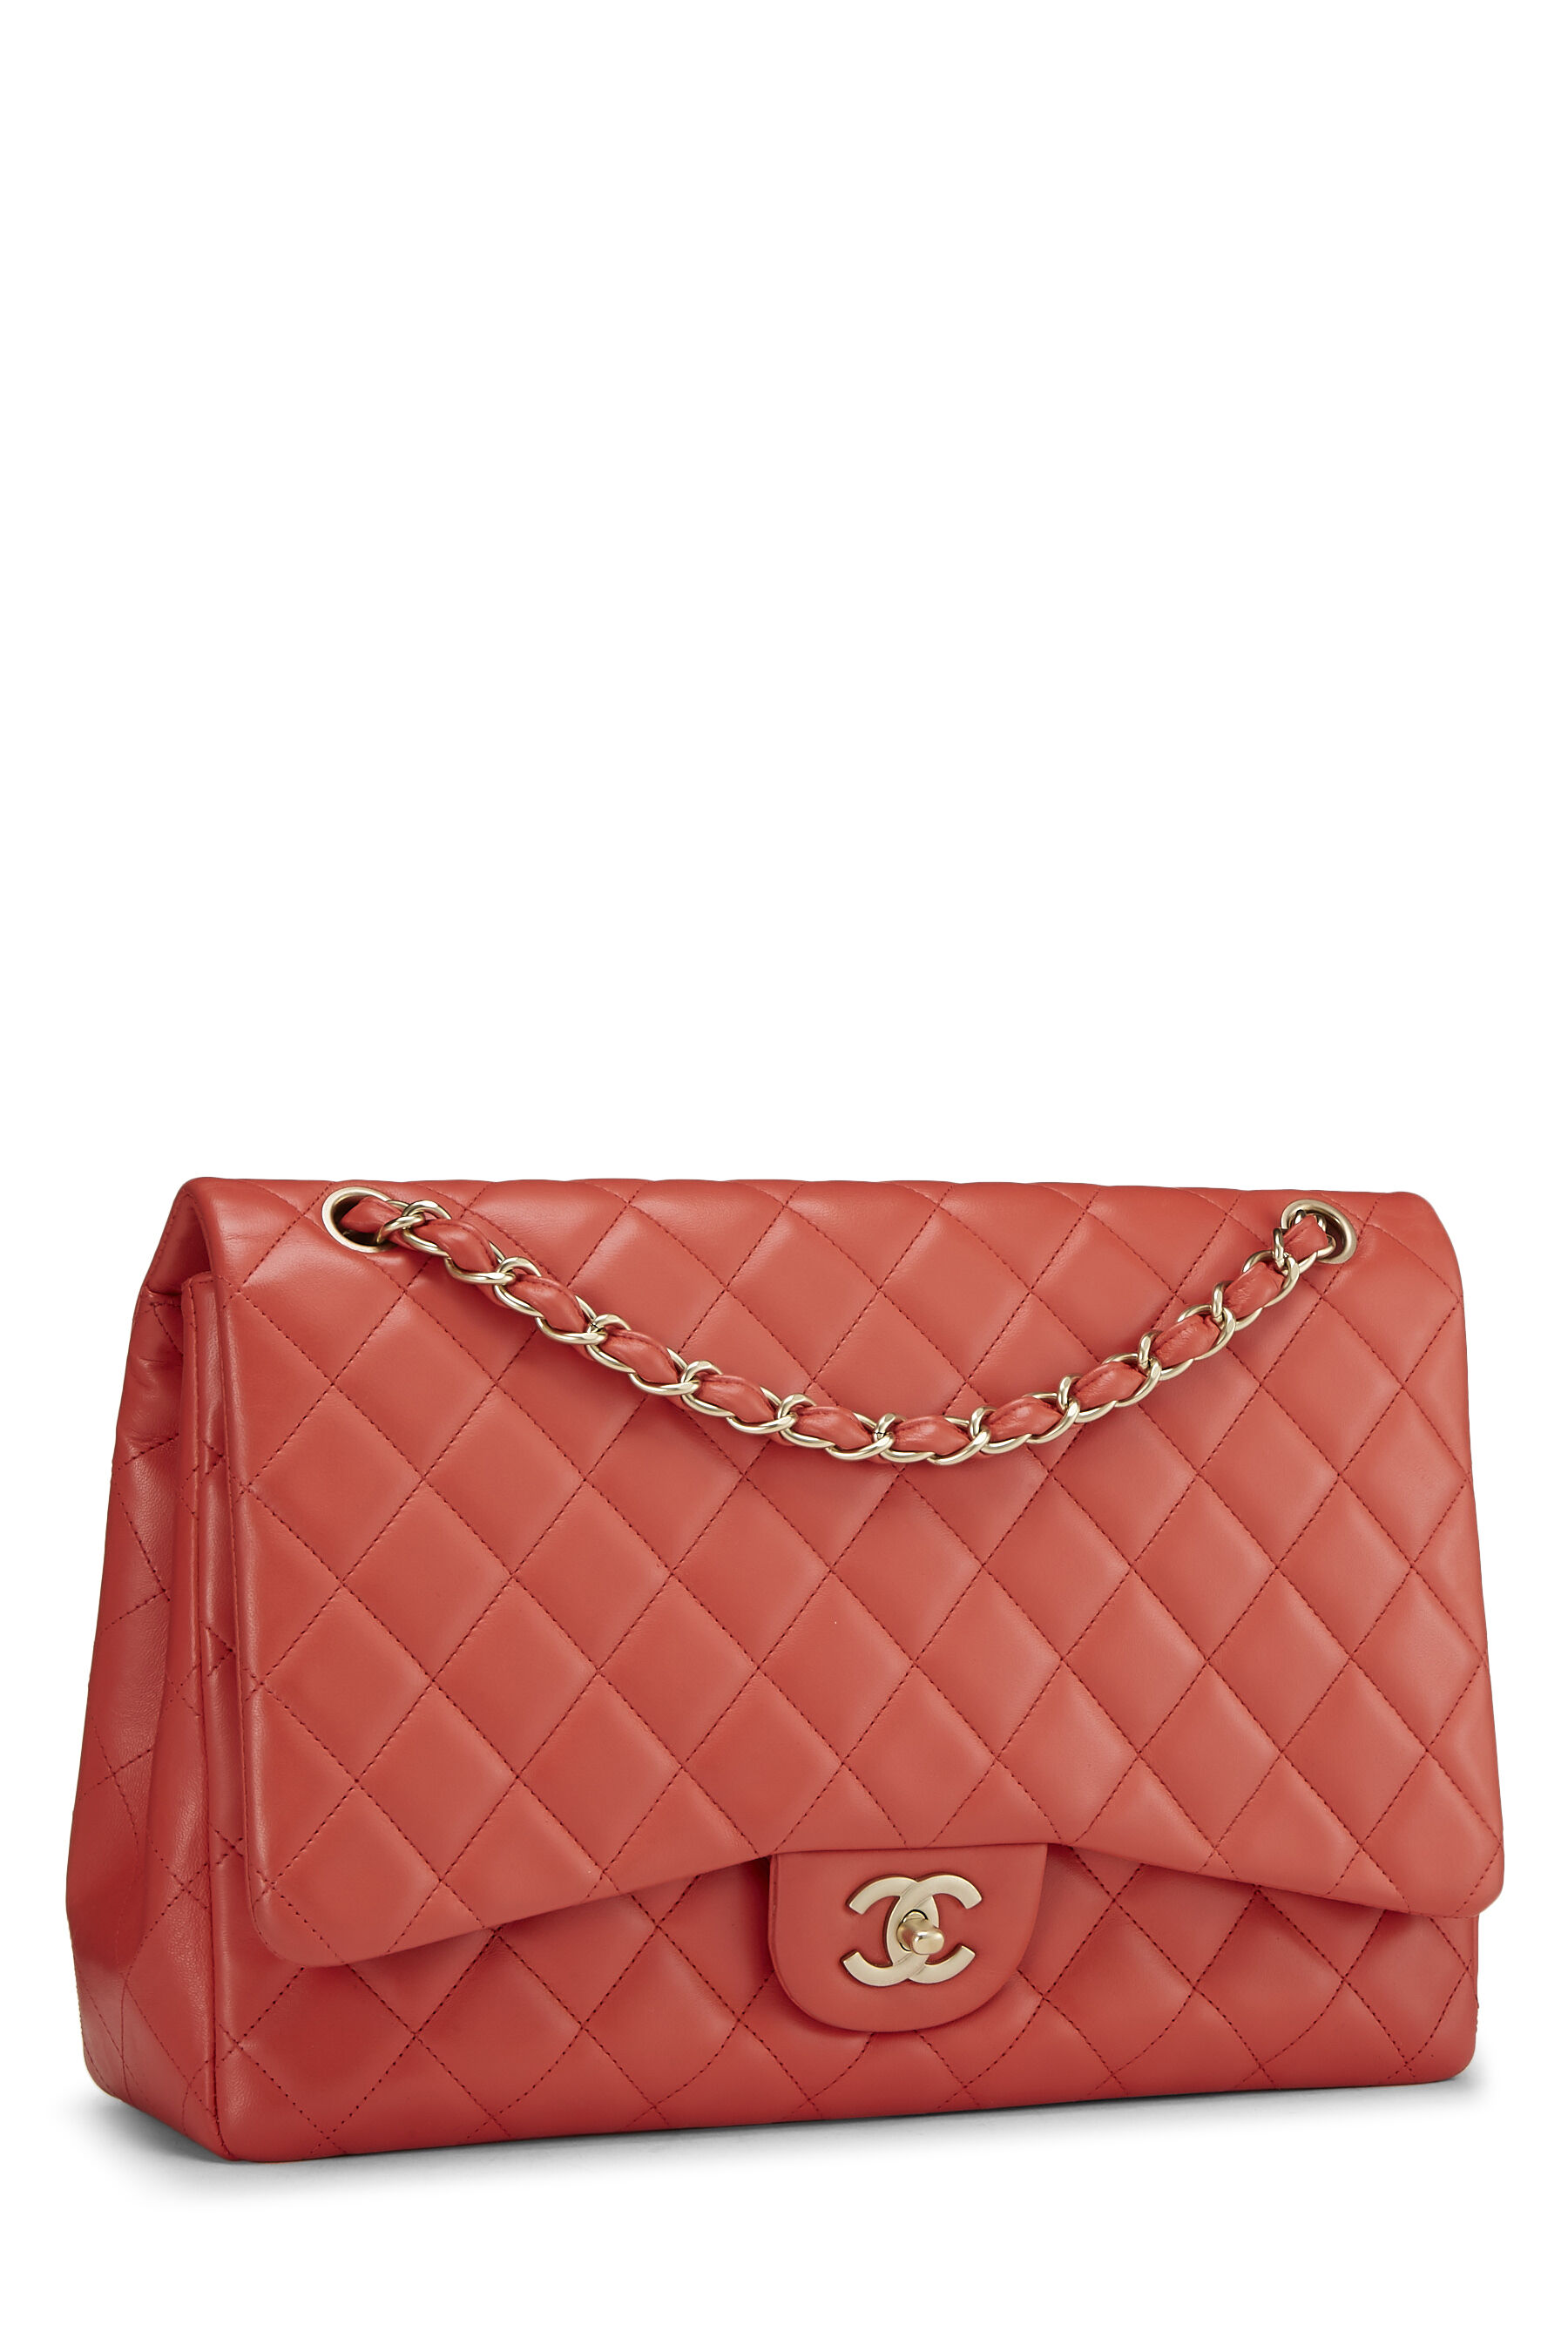 Chanel - Orange Quilted Lambskin Classic Flap Maxi